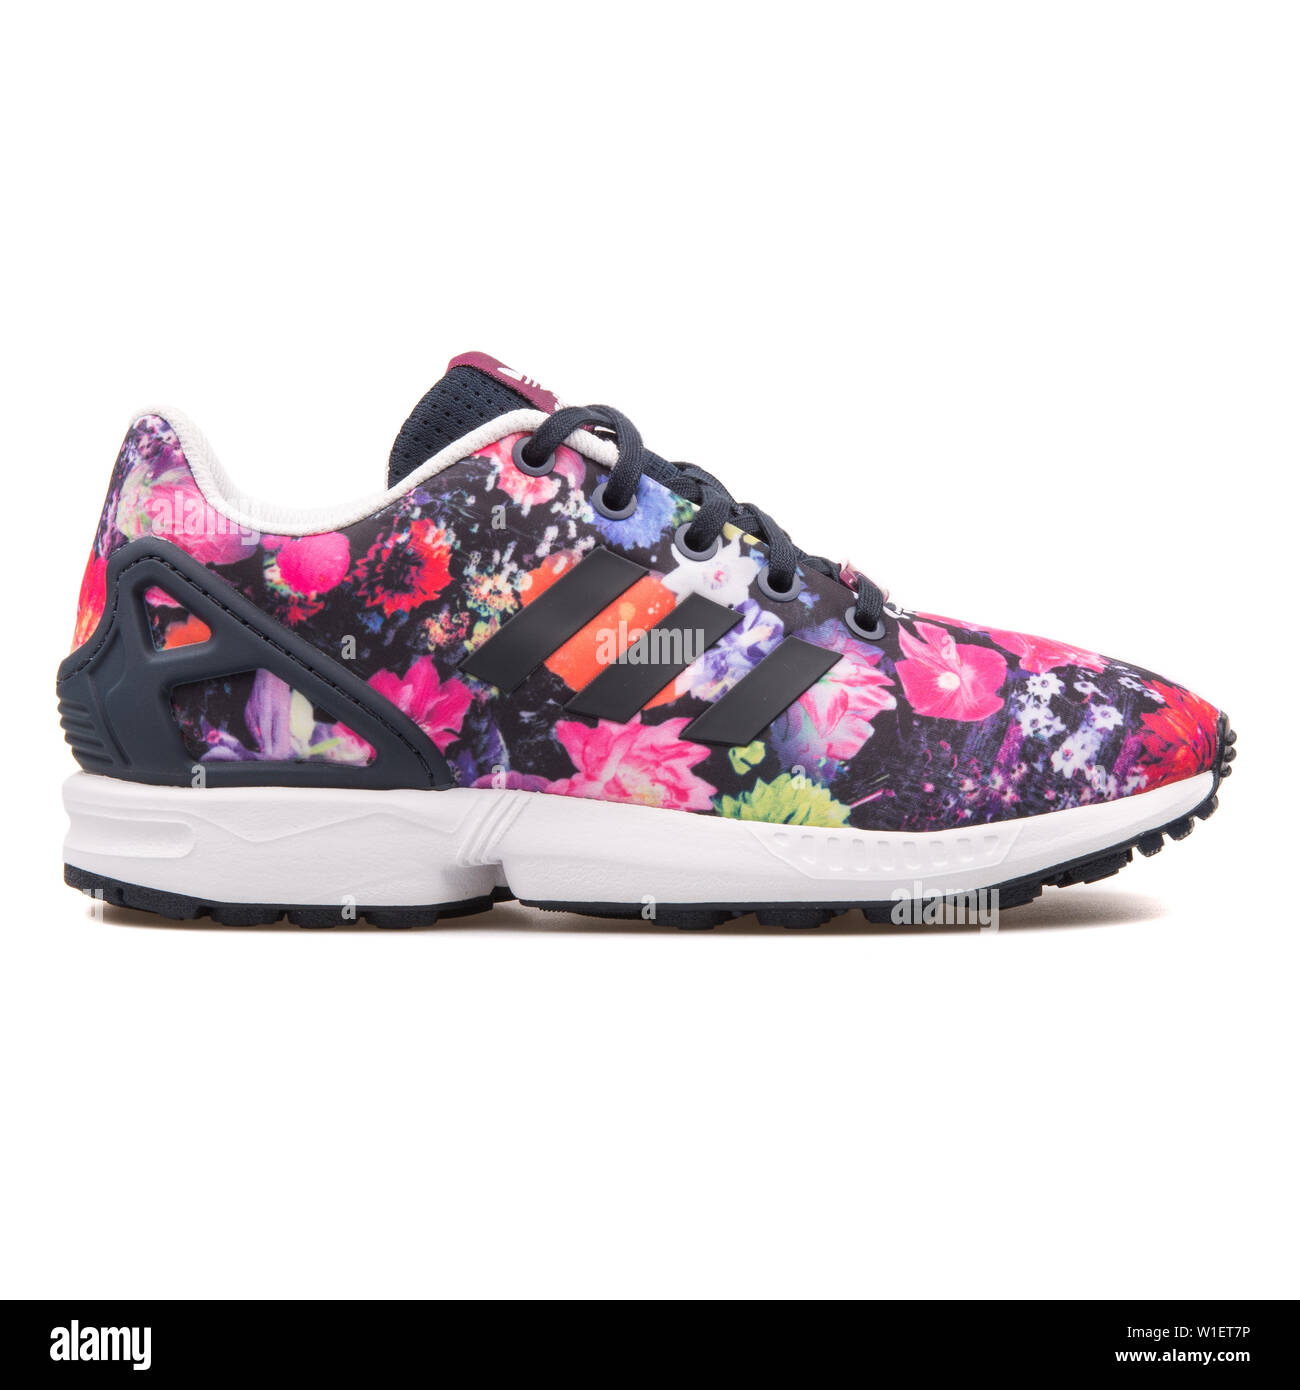 floral tennis shoes adidas